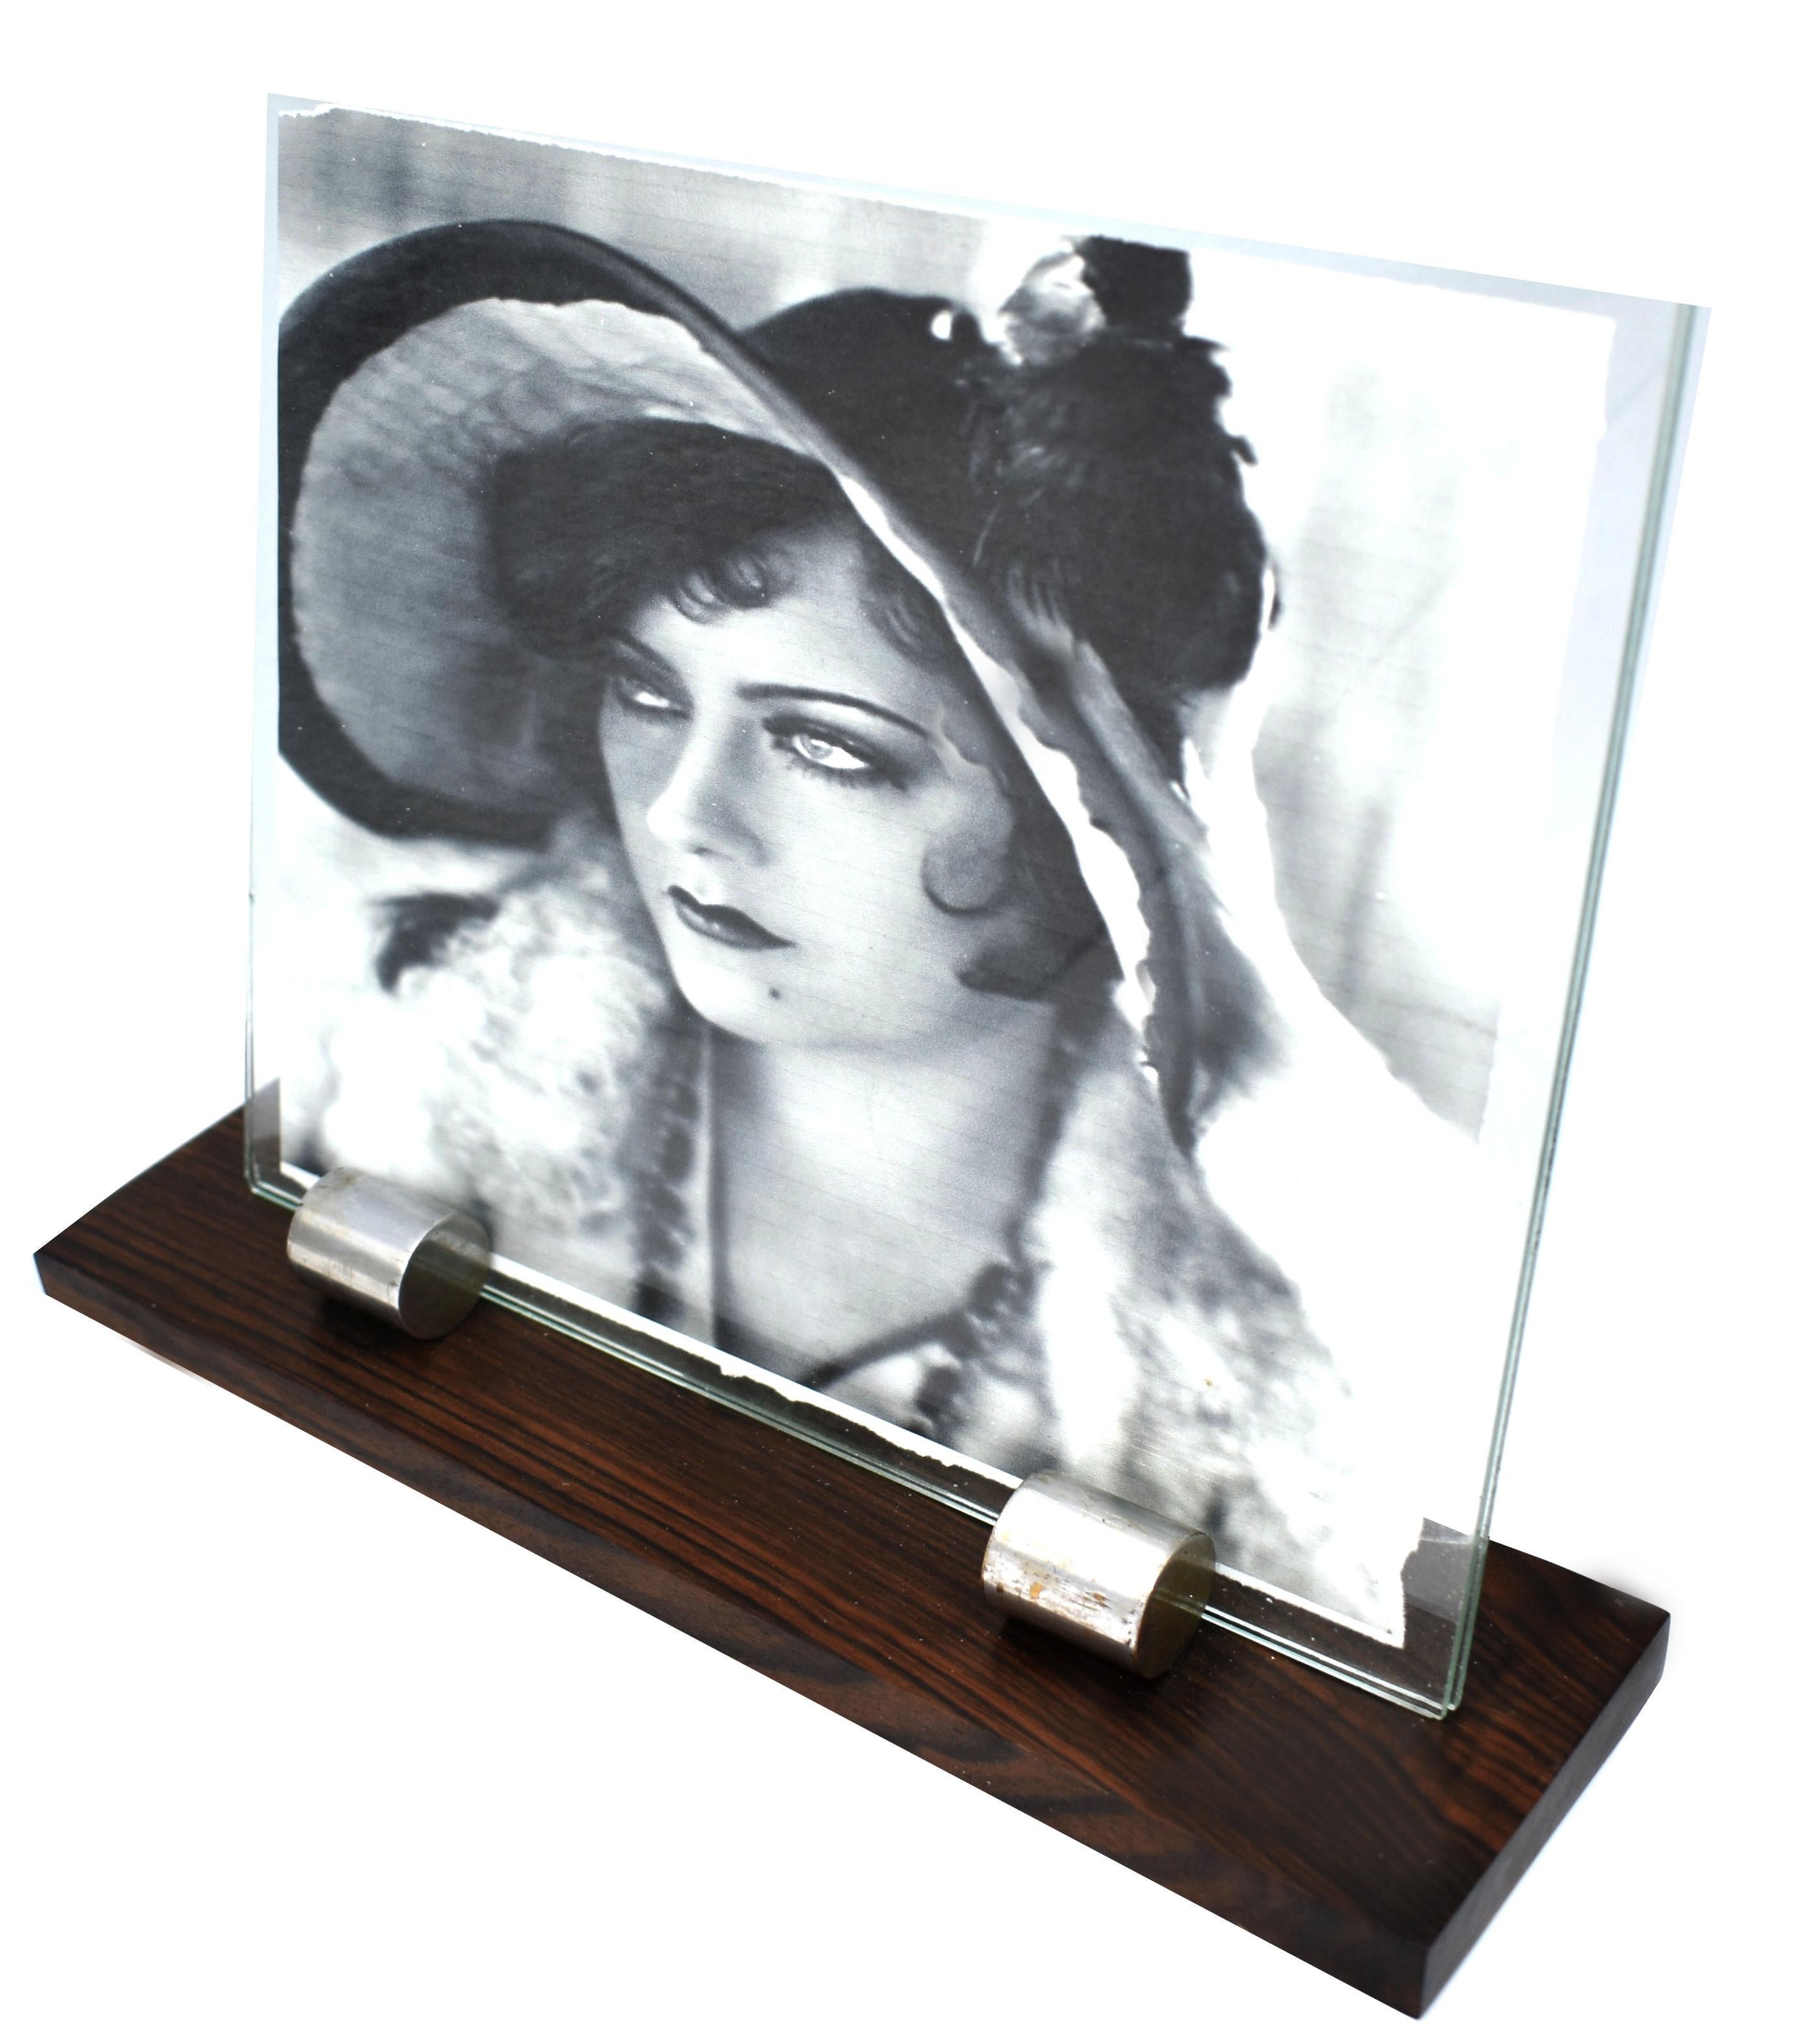 For your consideration is this large stylish 1930s Art Deco picture frame. Features a wooden base with two chrome accents which act as the glass holders. Lovely stylish piece, sourced in France and dating to the 1930s. The photo image inside the